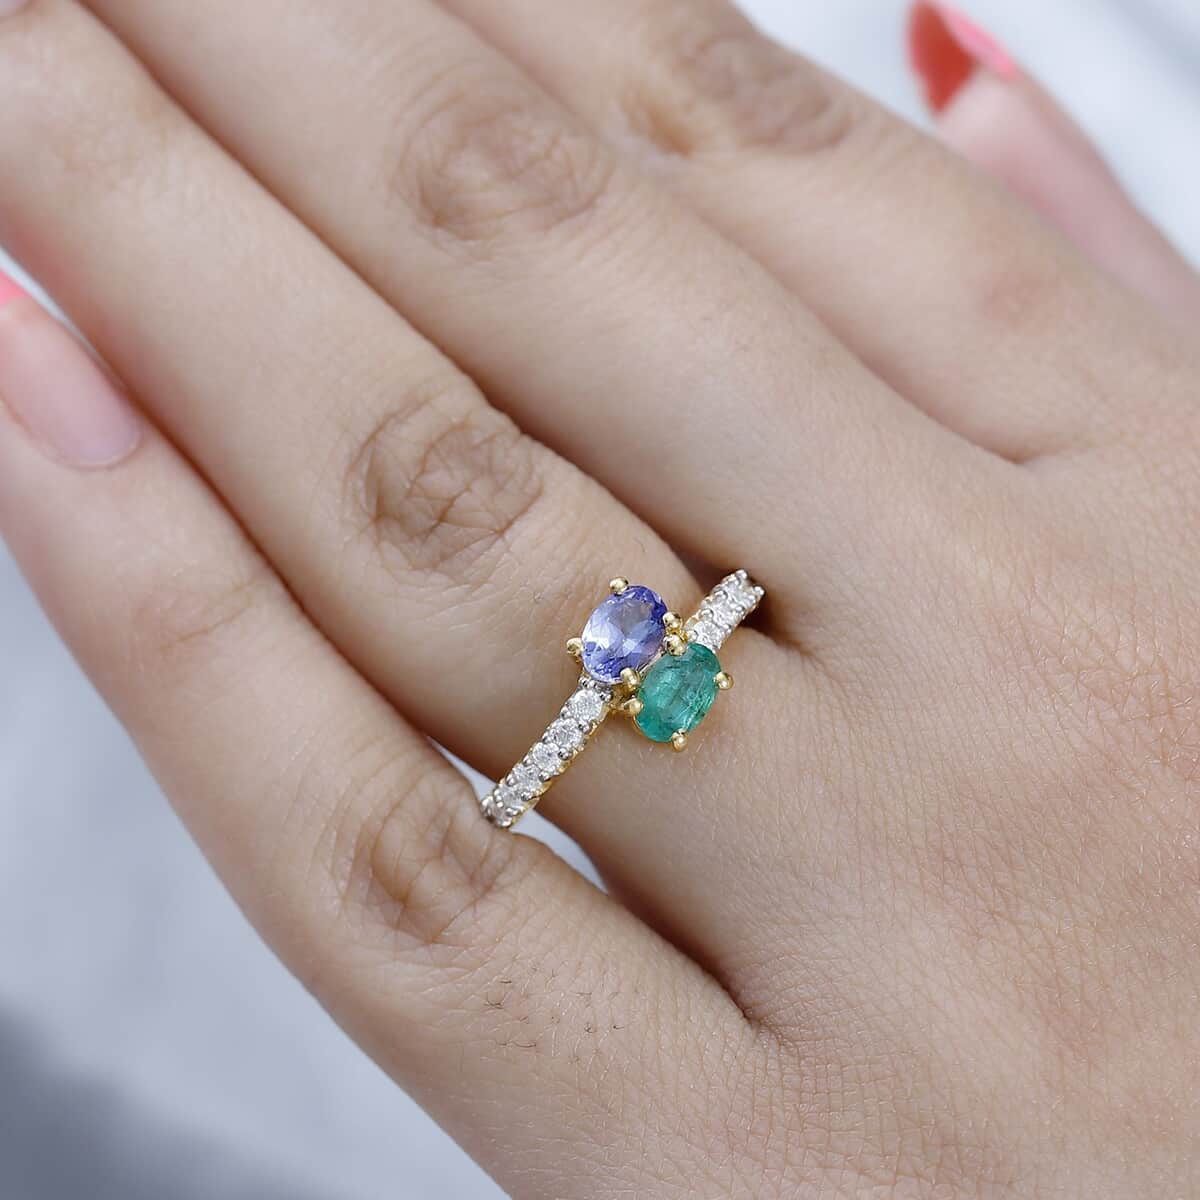 Buy Premium Tanzanite, Kagem Zambian Emerald and Moissanite Snake Inspired  Bypass Ring in Vermeil Yellow Gold Over Sterling Silver (Size 5.0) 1.30 ctw  at